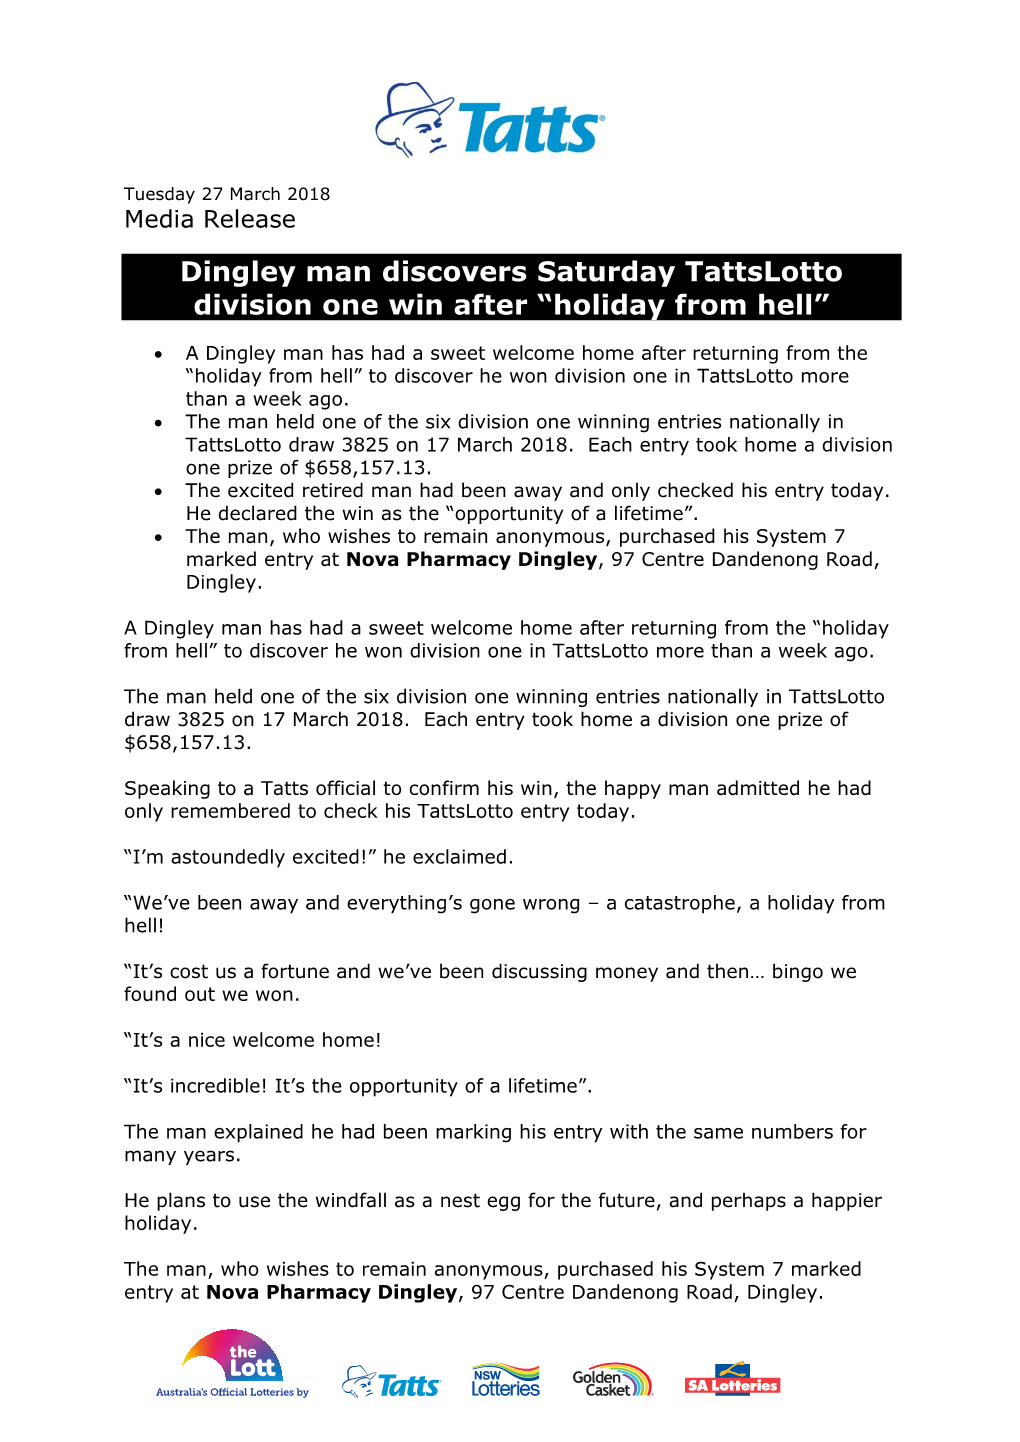 Dingley Man Discovers Saturday Tattslotto Division One Win After “Holiday from Hell”